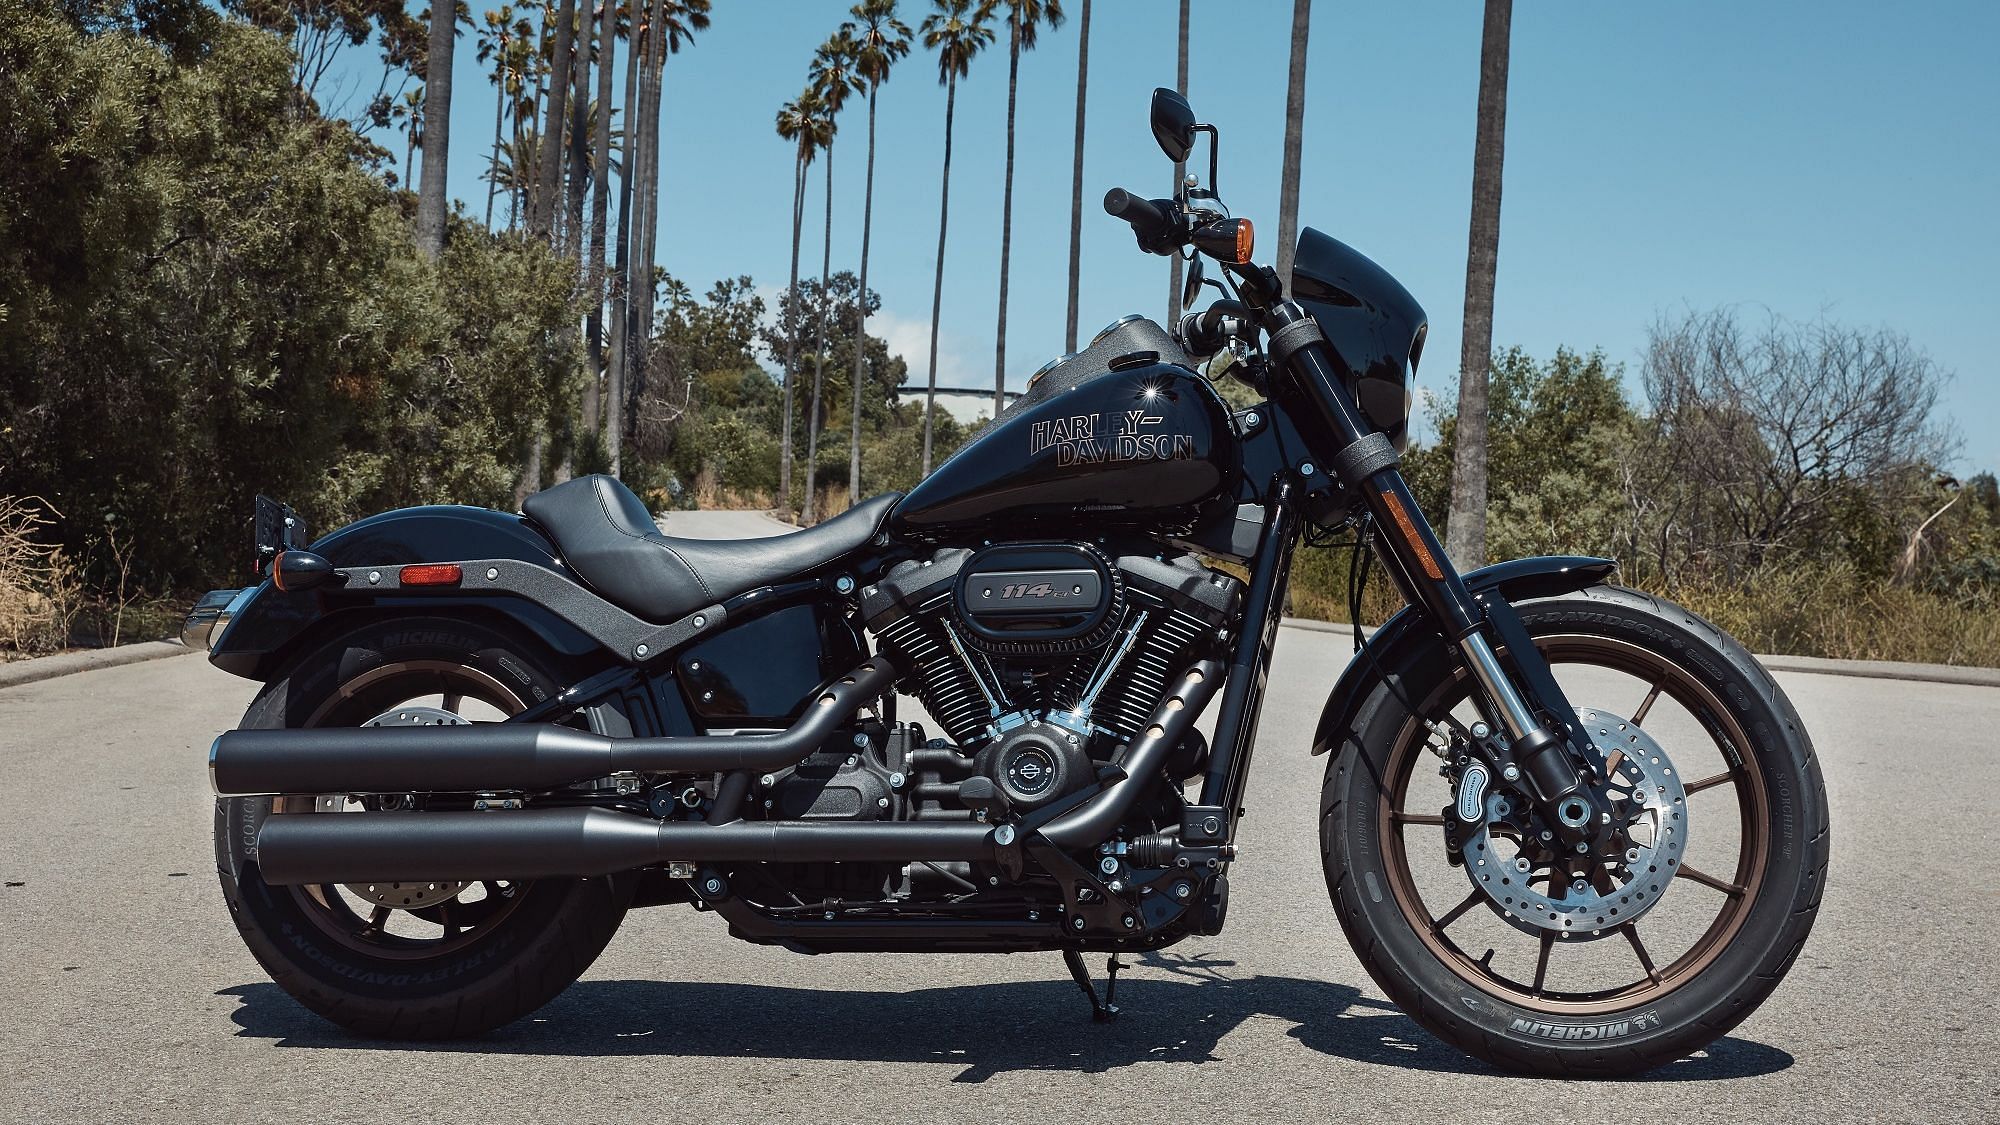 The Harley-Davidson Low Rider S is powered by a 1,868 cc twin-cylinder engine.